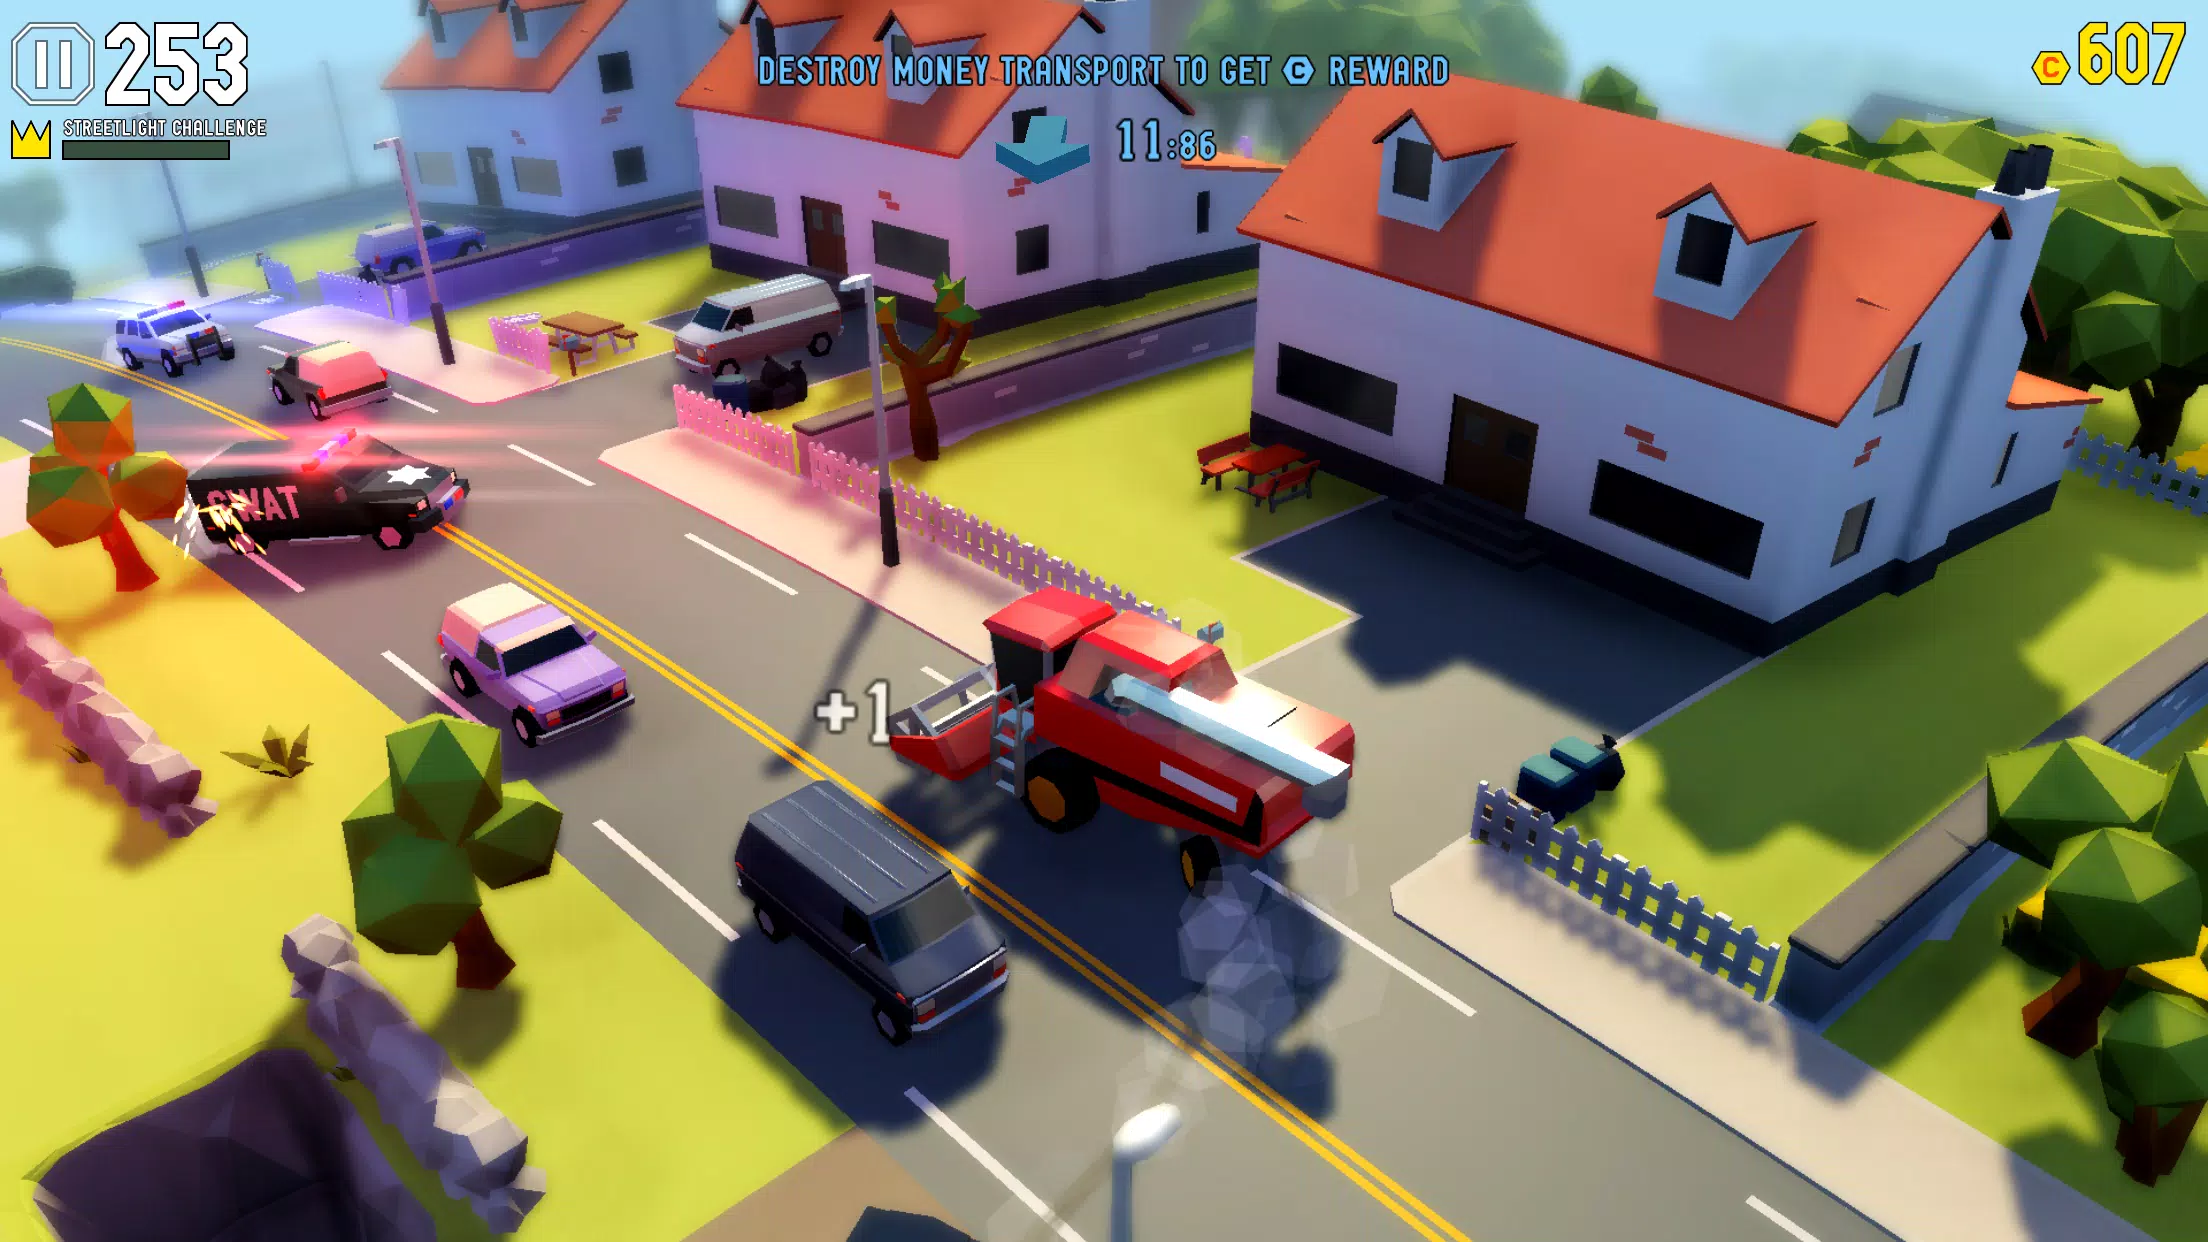 Reckless Getaway 2: Car Chase APK for Android Download